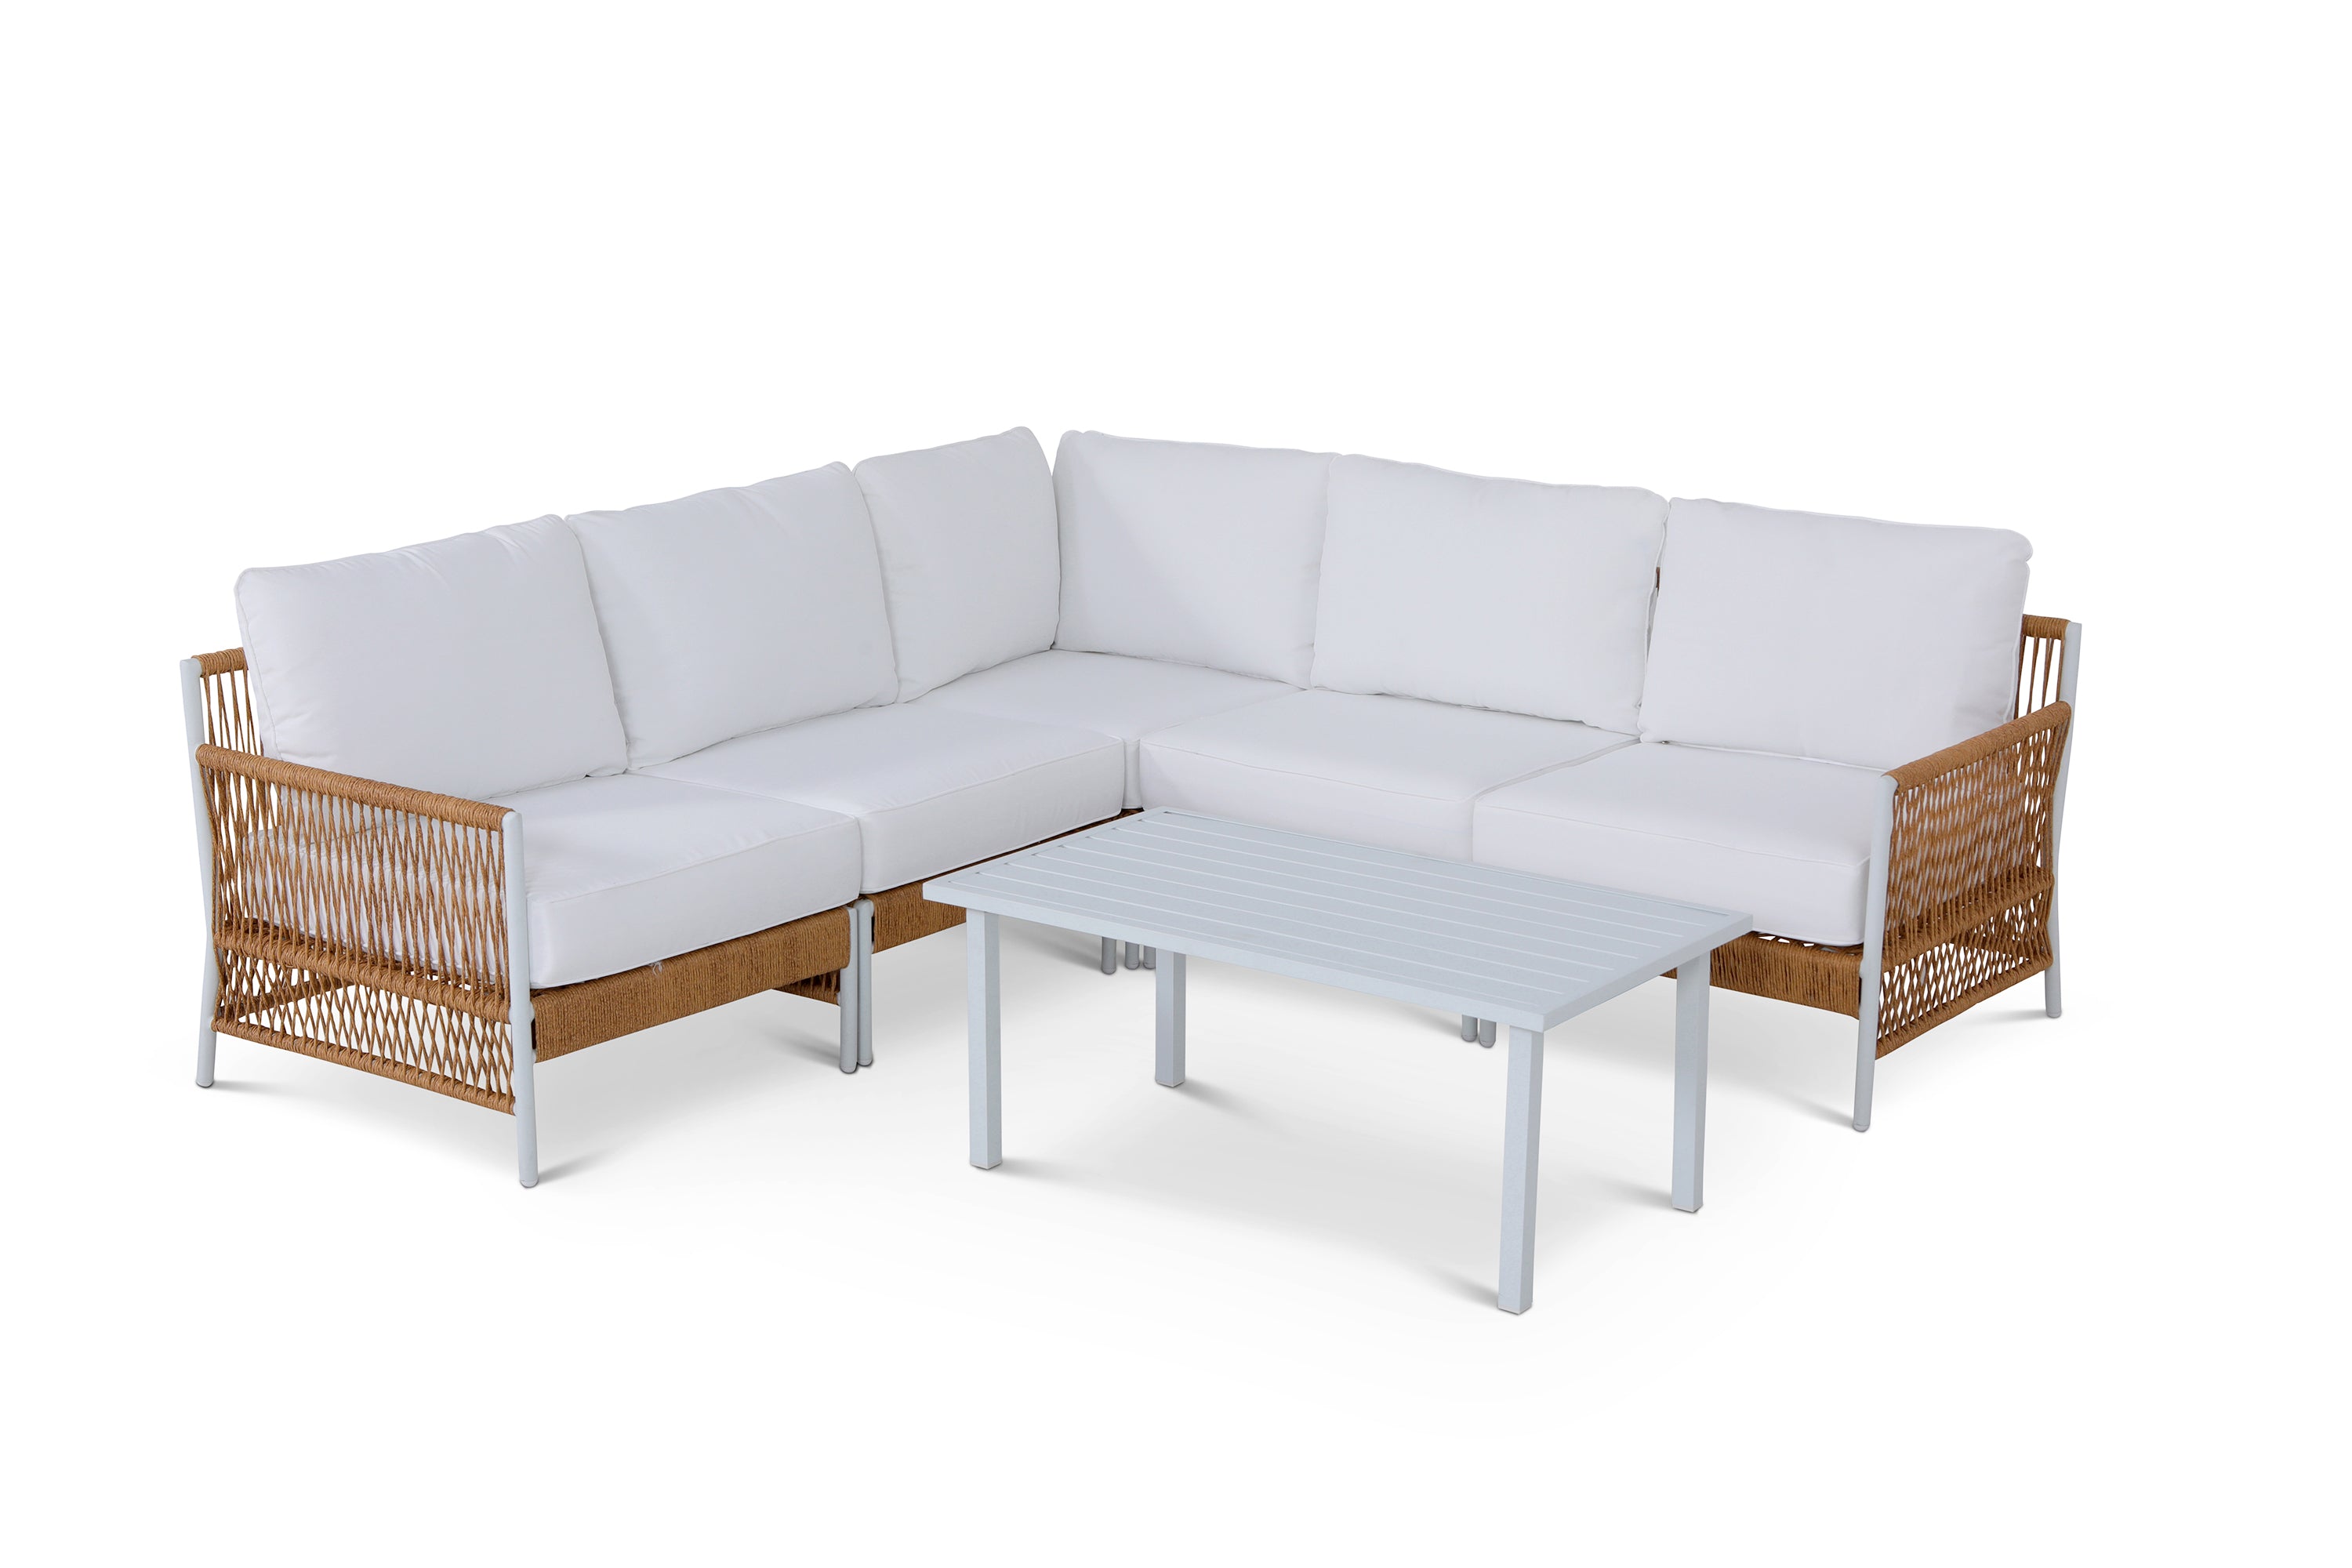 Olivia Ivory 6 Piece Outdoor Sectional Set